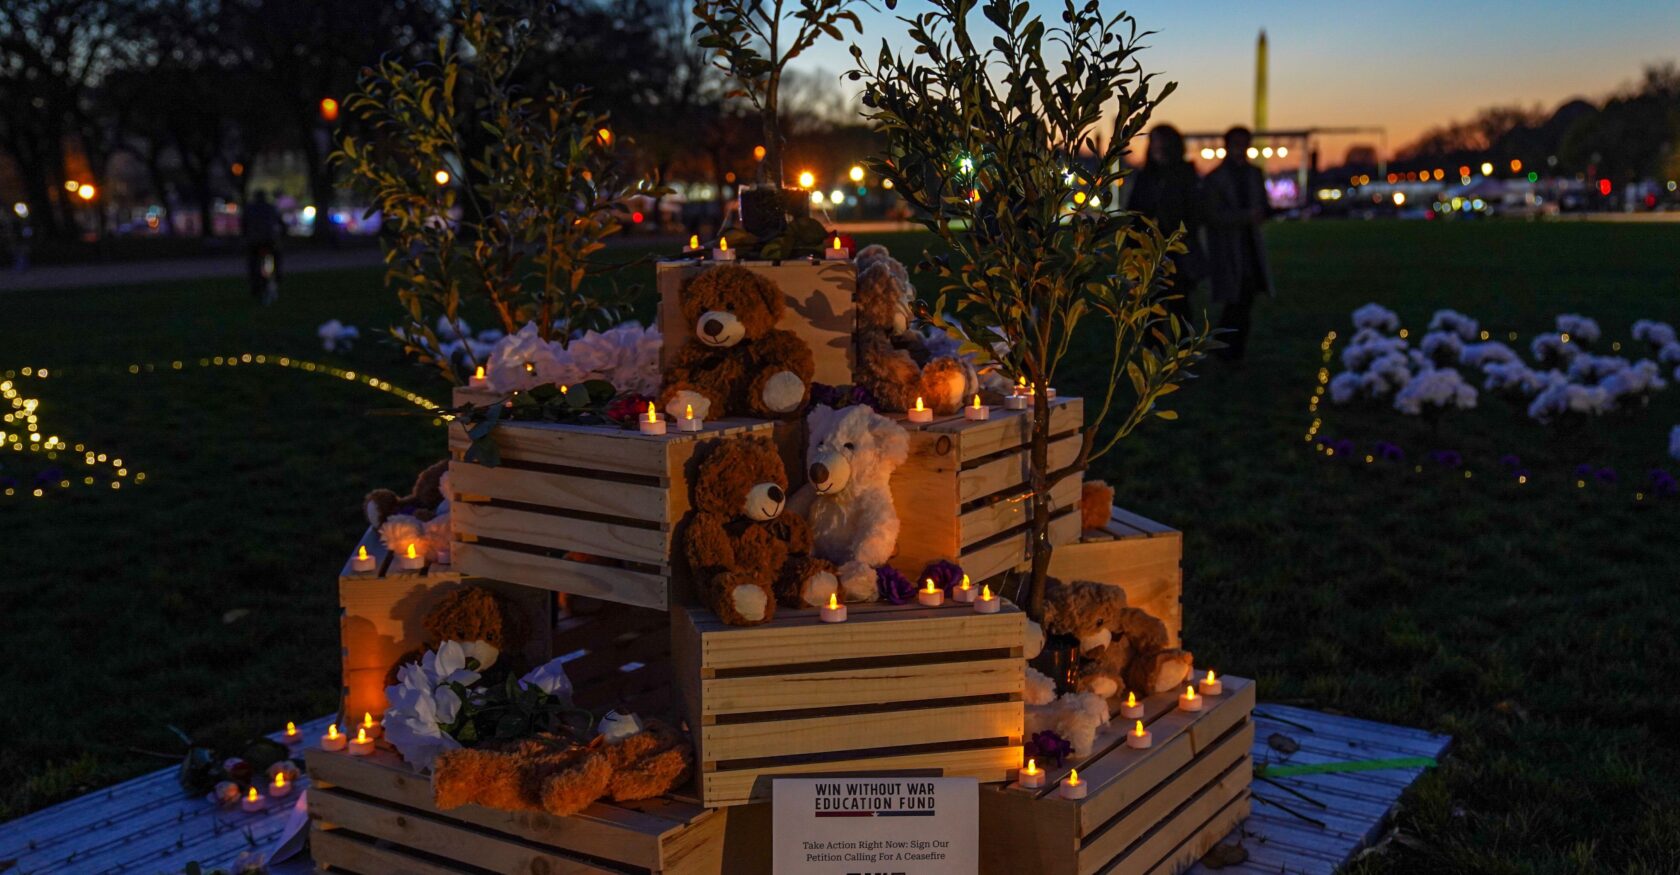 Win Without War Education Fund Builds Temporary Memorial Art Installation On The National Mall Mourning The Number Of Deaths And Calling For A Safe Return Of Hostages And A Ceasefire In The Ongoing Israel – Hamas War